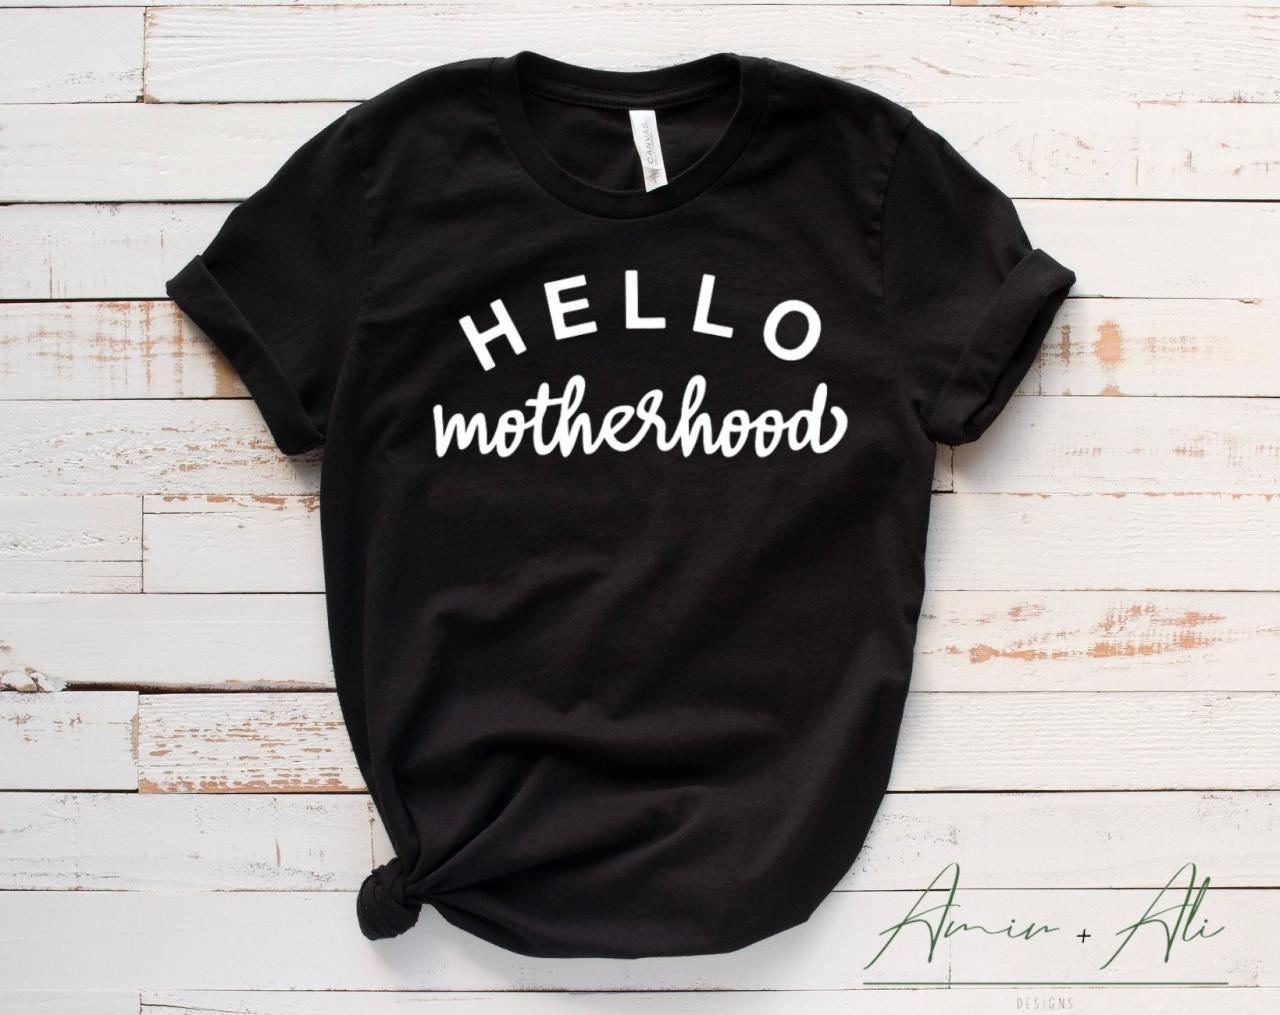 Motherhood T-Shirt, shirts for a mom, first Mother’s Day gift, mom birthday gift, baby shower gift for mom, mom shirt, mom life shirt, cute